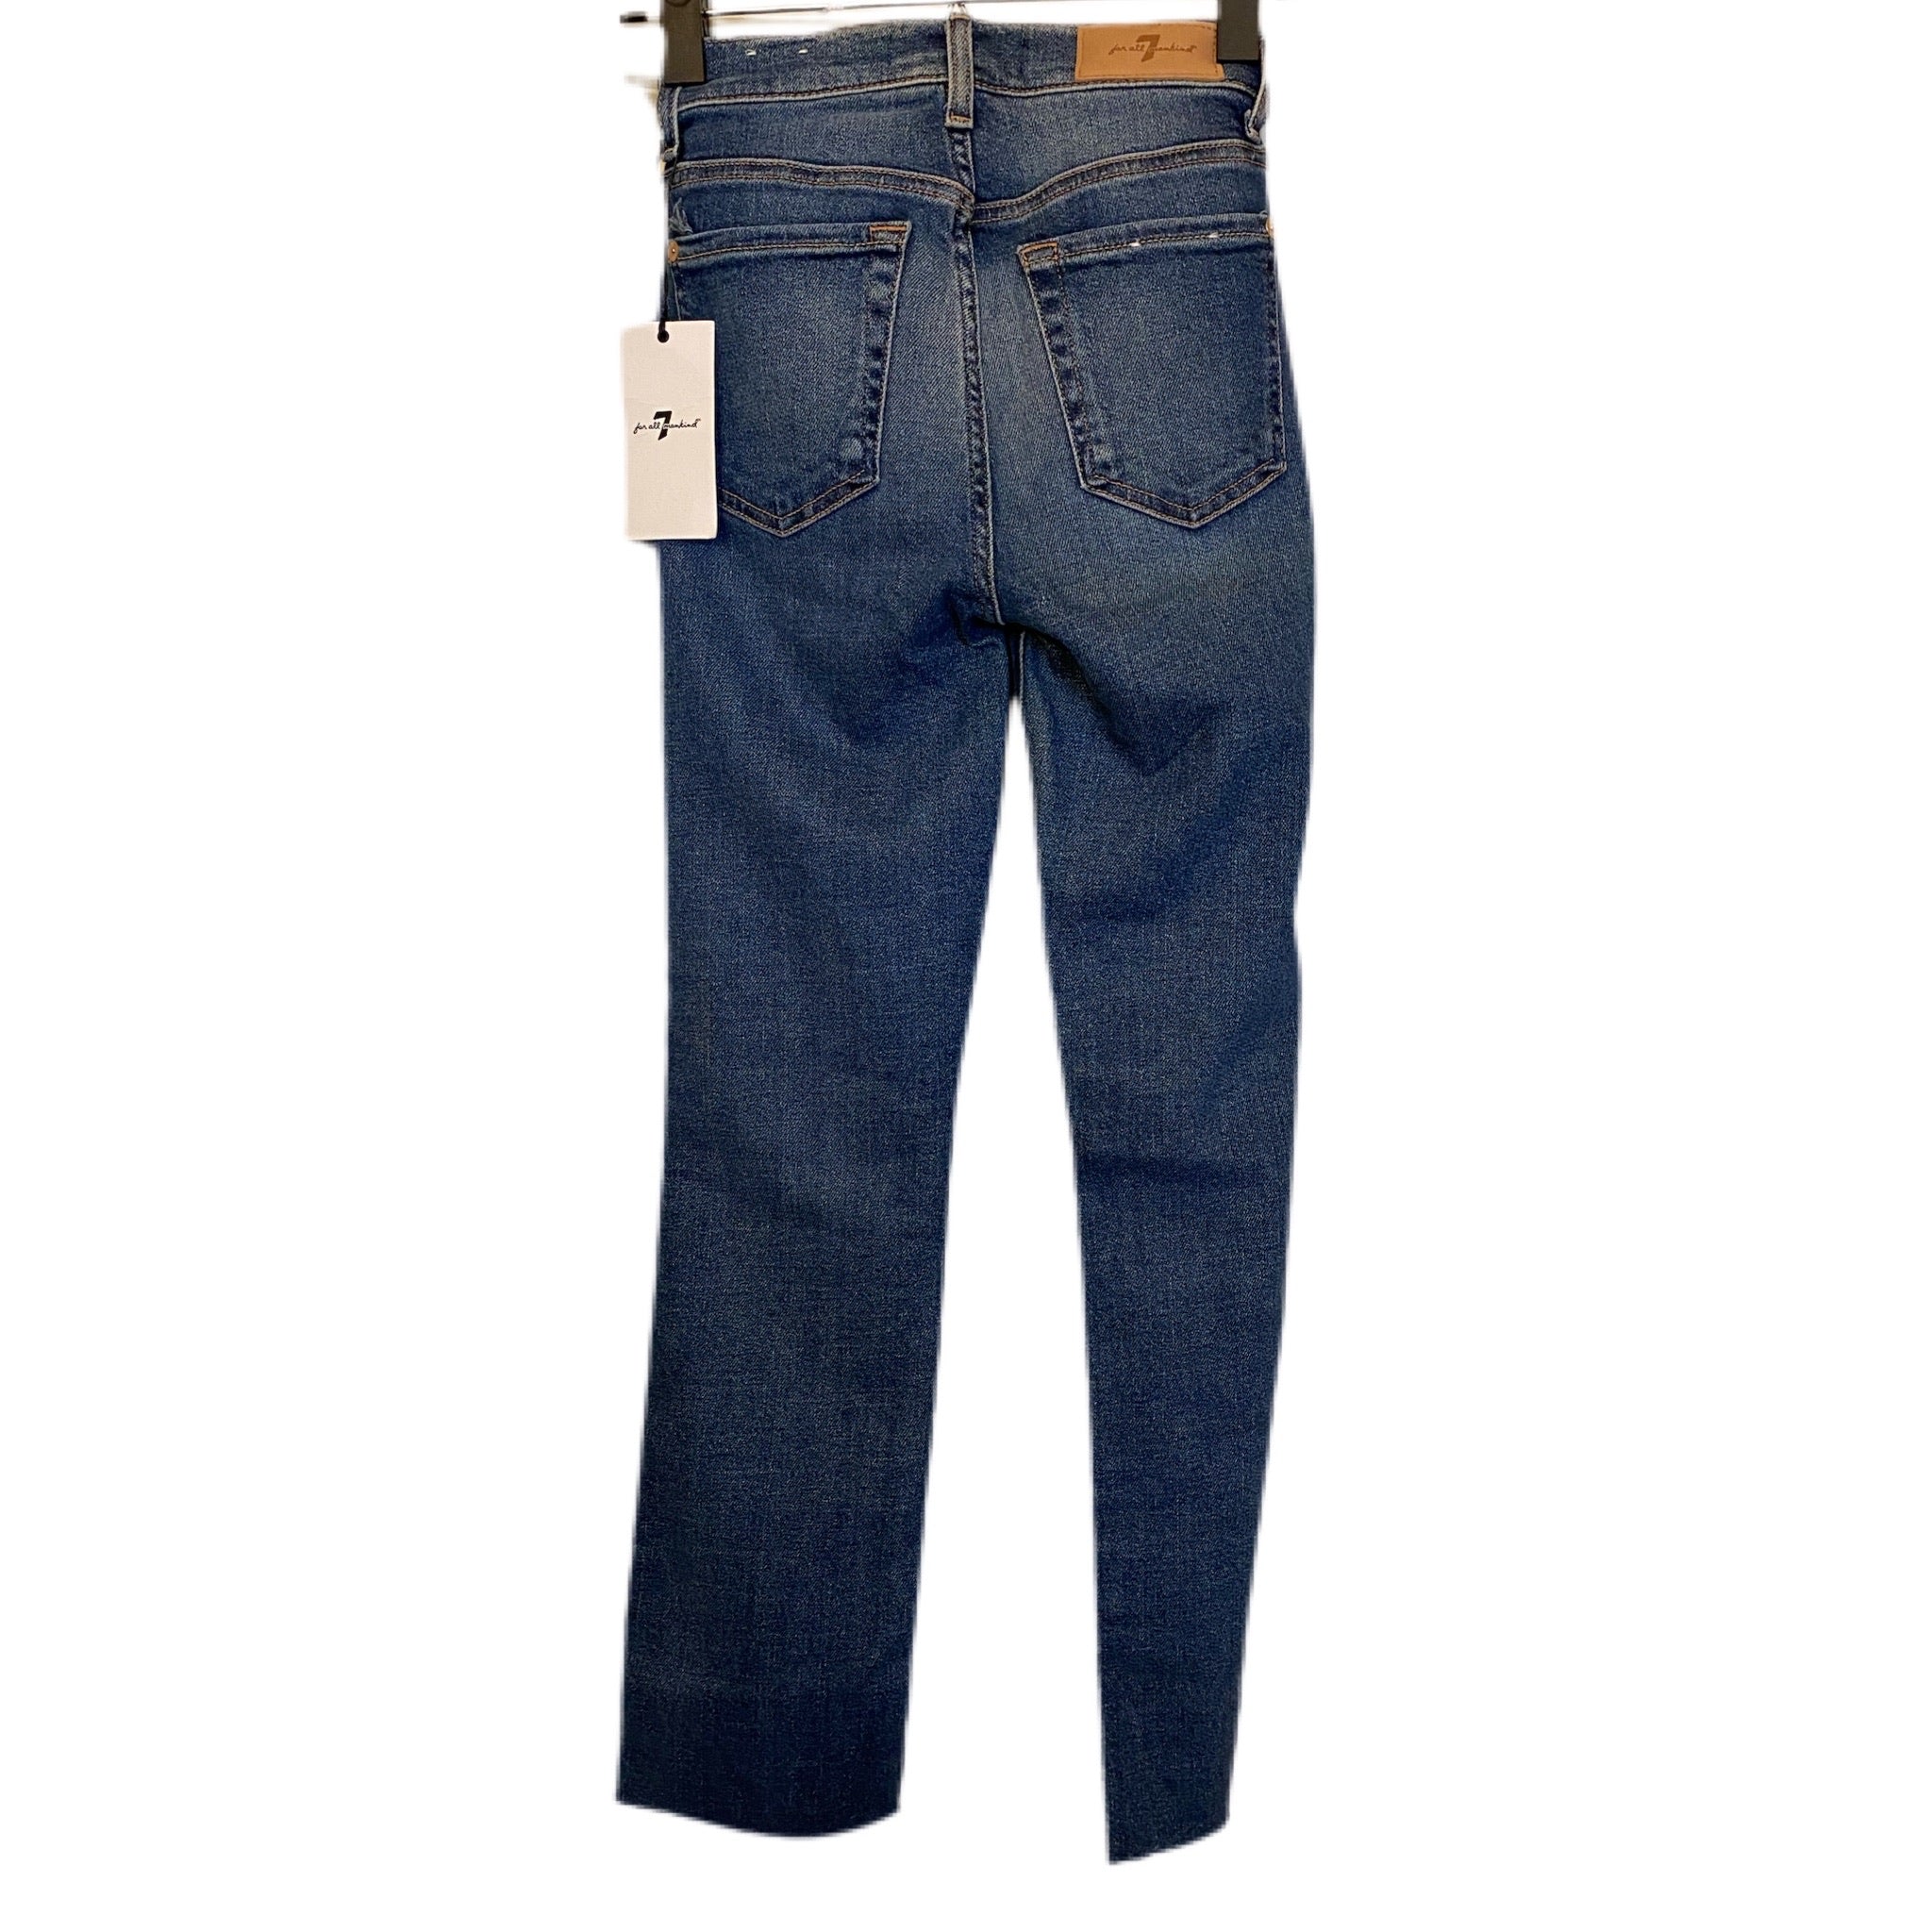 hektar bekræfte hobby 1) * 7 For All Mankind Luxe Vintage Edie Jeans NWT – ericajaneboutique